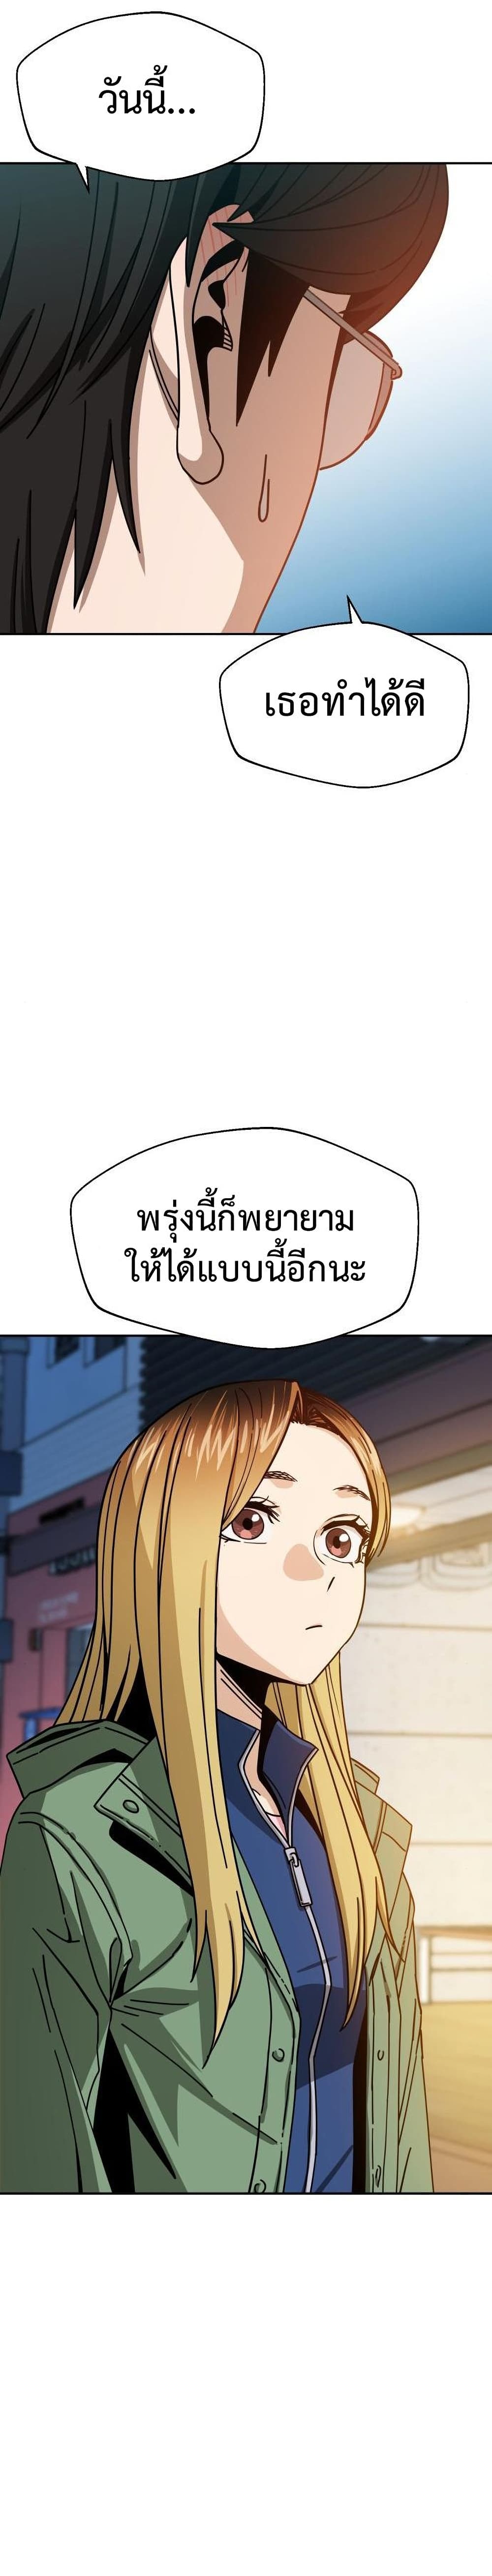 Match Made in Heaven by chance ตอนที่ 28 29